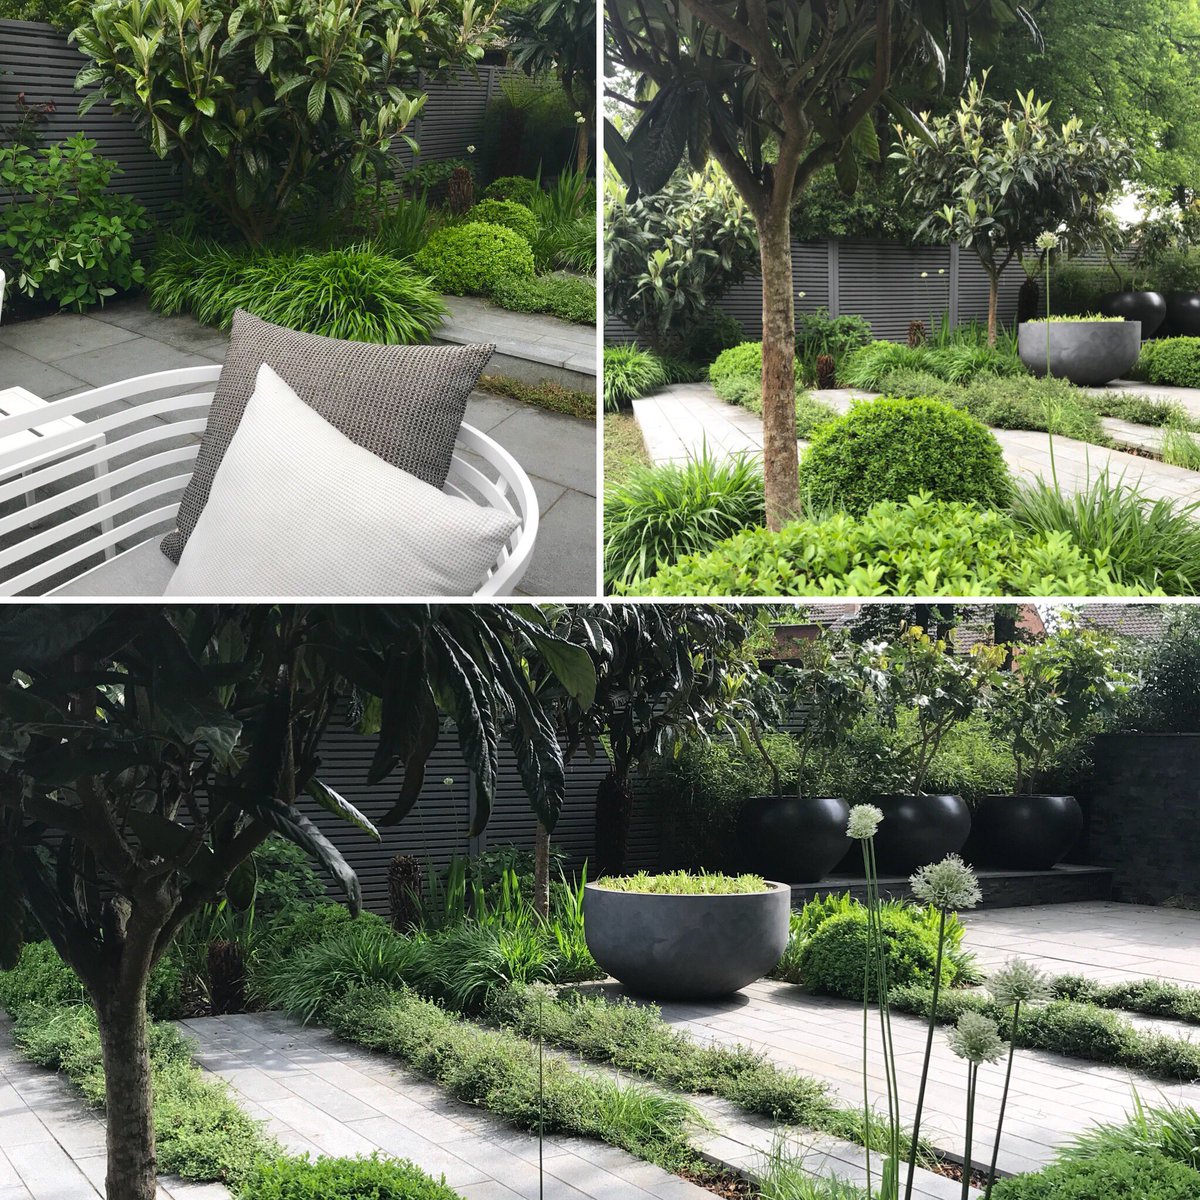 Out this week visiting some of our gardens completed with our wonderful  #aftercare team this one in #Newbarn #kent #garden #shadygarden #green #granite & #greys #gardendesign #plankpaving #statementpots #simple #palette #citybowl await #dicksonia to unfurl #eriobotryaJaponica